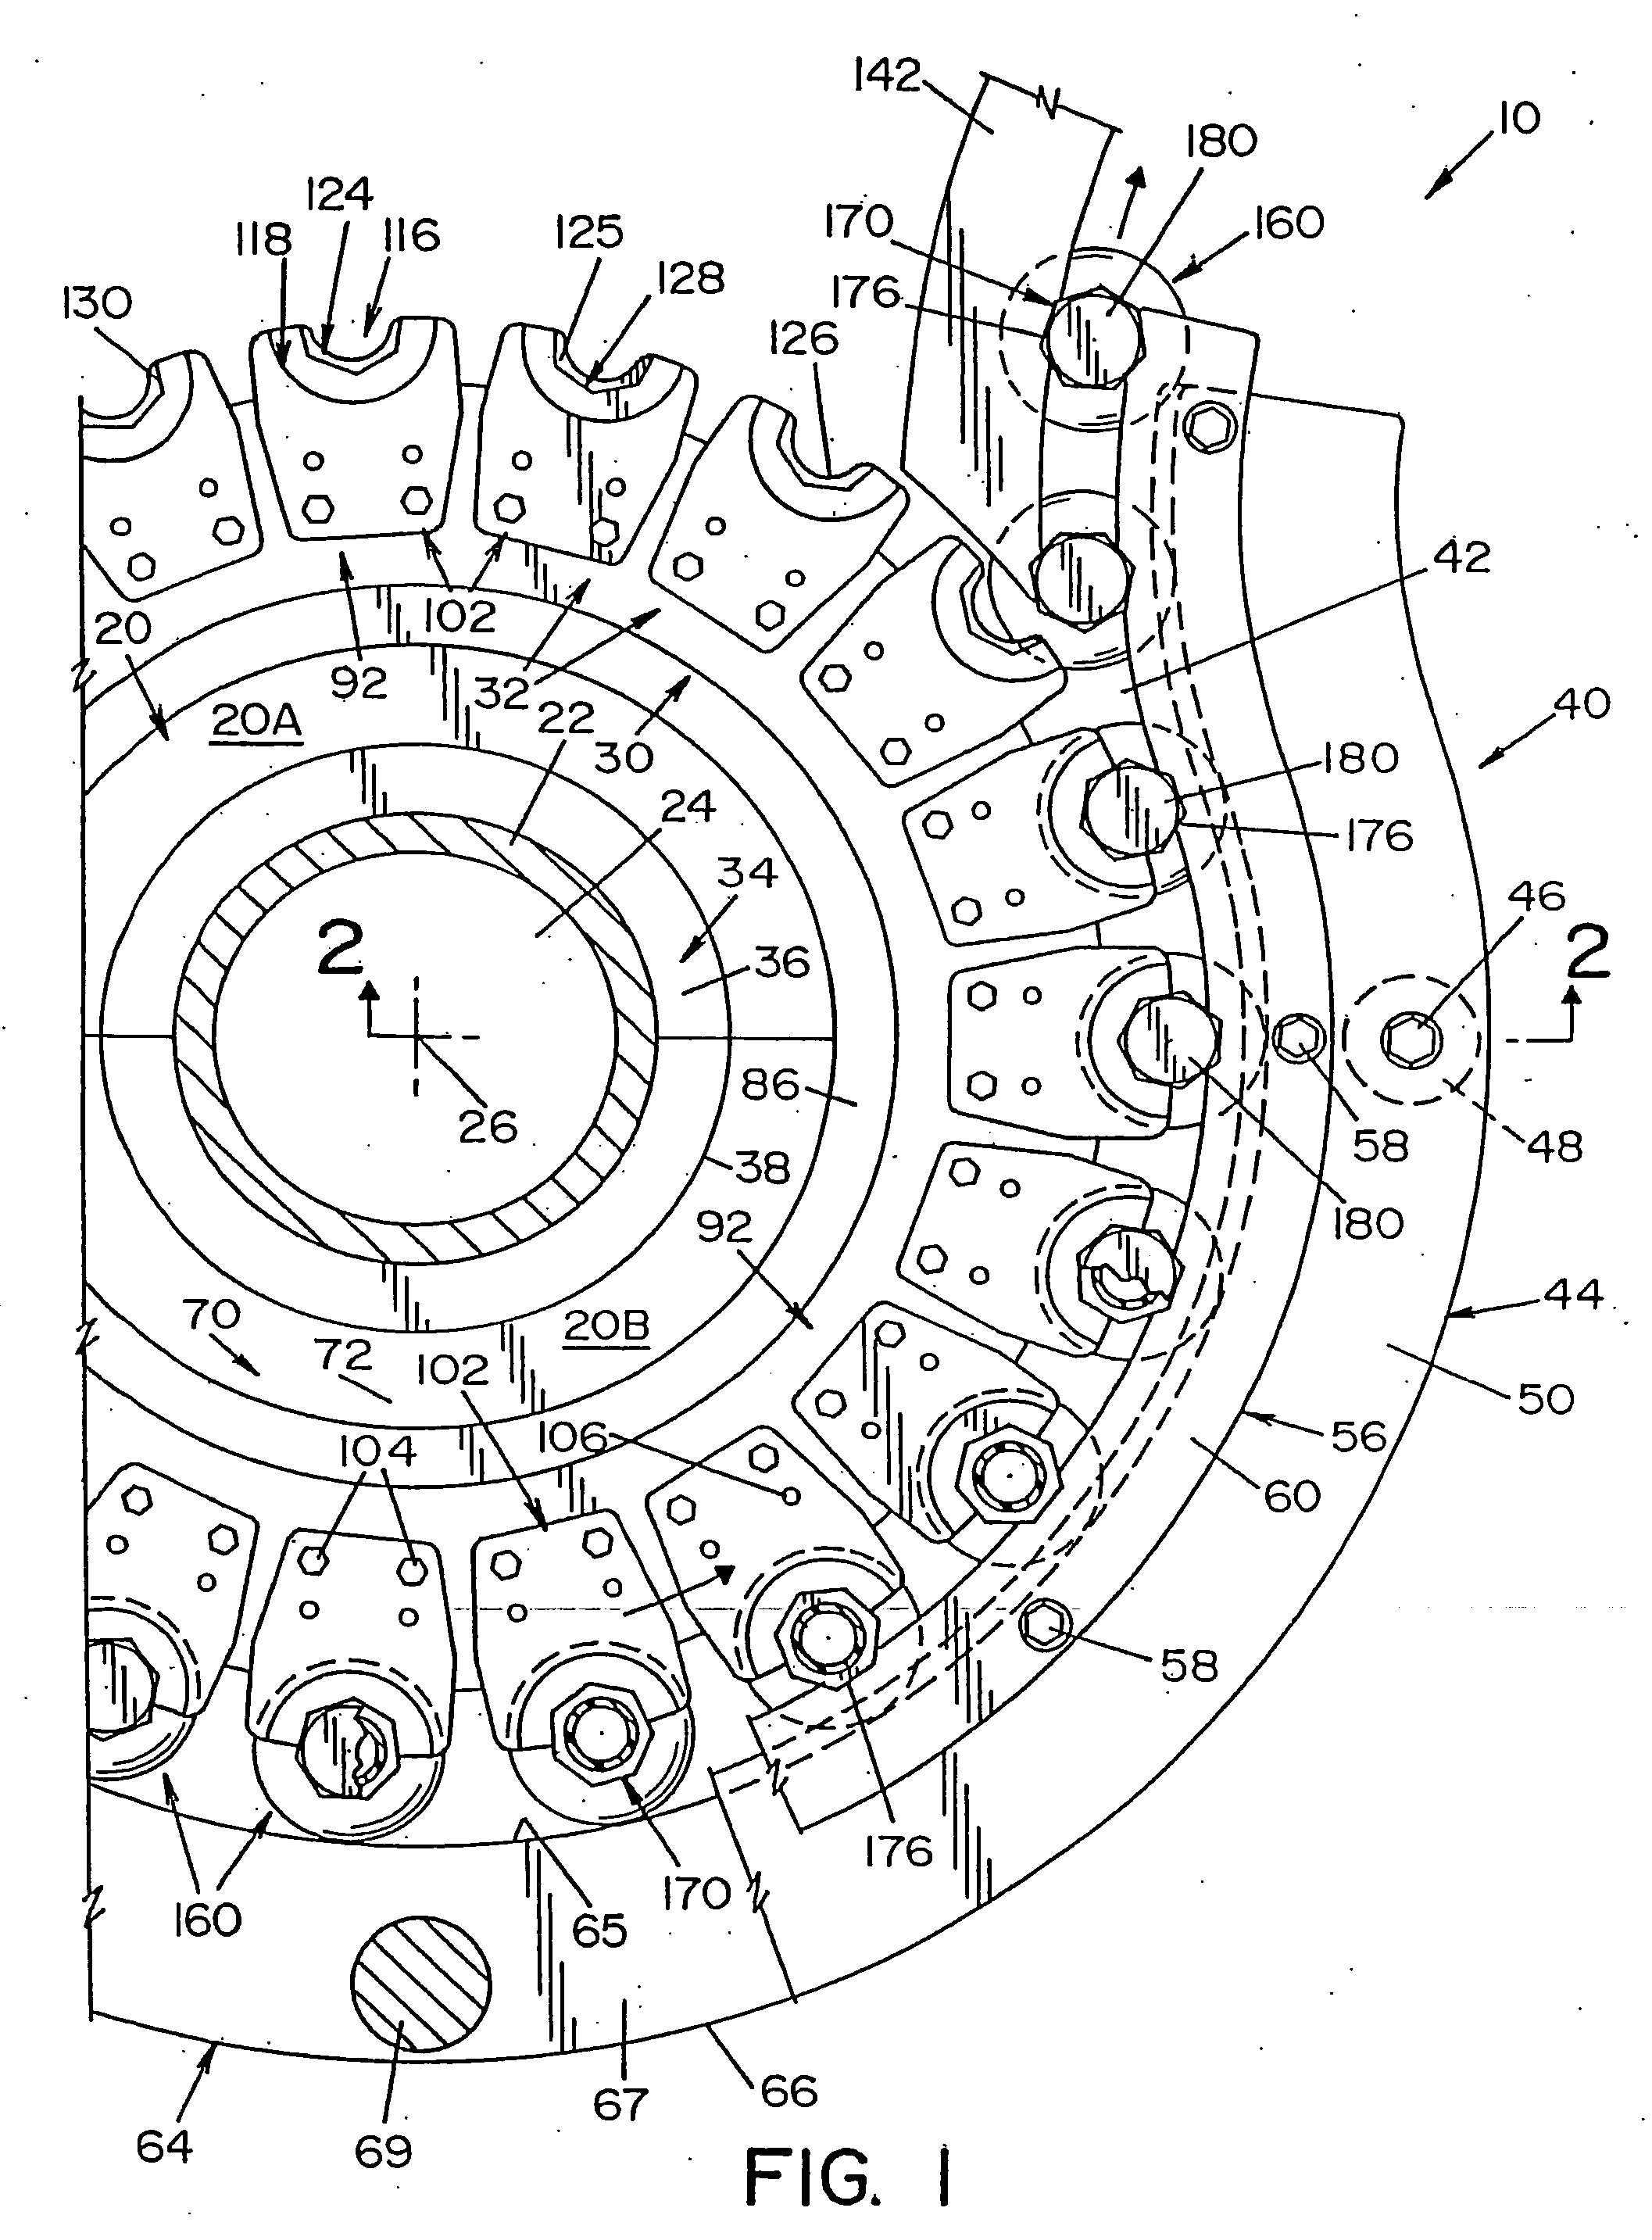 Plastic water bottle and apparatus and method to convey the bottle and prevent bottle rotation